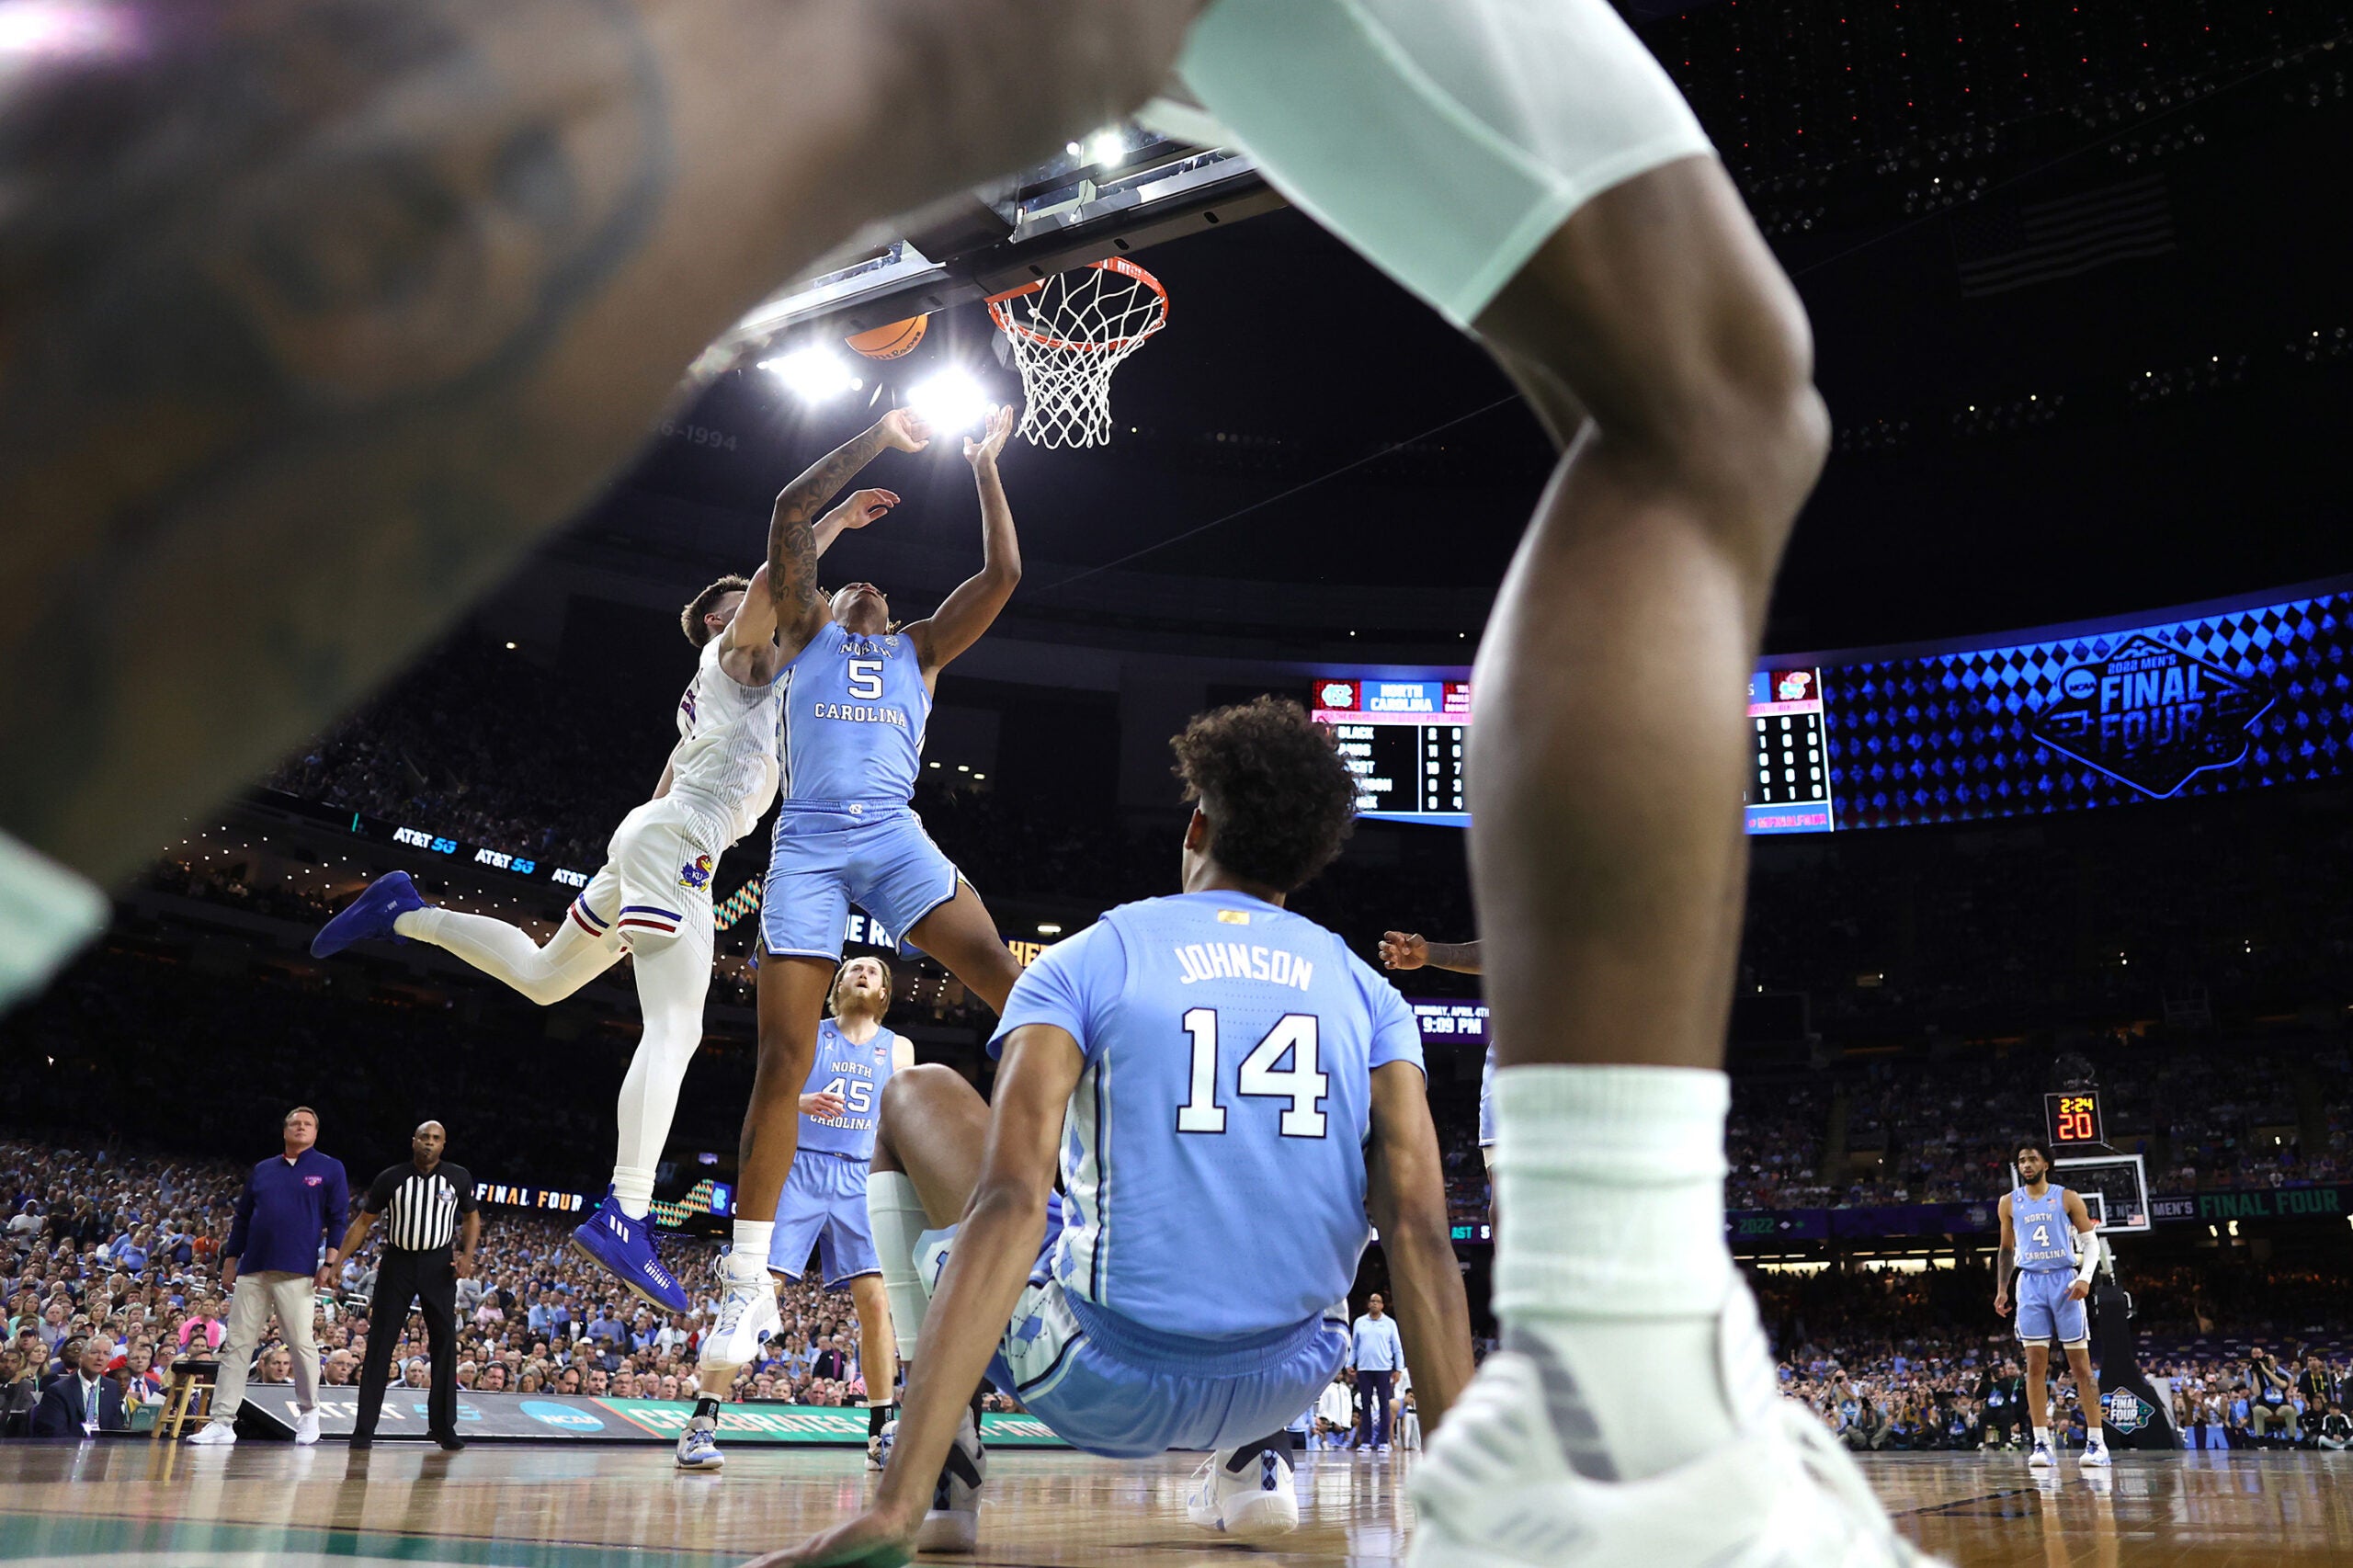 Armando Bacot #5 of the North Carolina Tar Heels shoots the ball as Christian Braun #2 of the Kansas Jayhawks defends in the first half of the game during the 2022 NCAA Men's Basketball Tournament National Championship. 